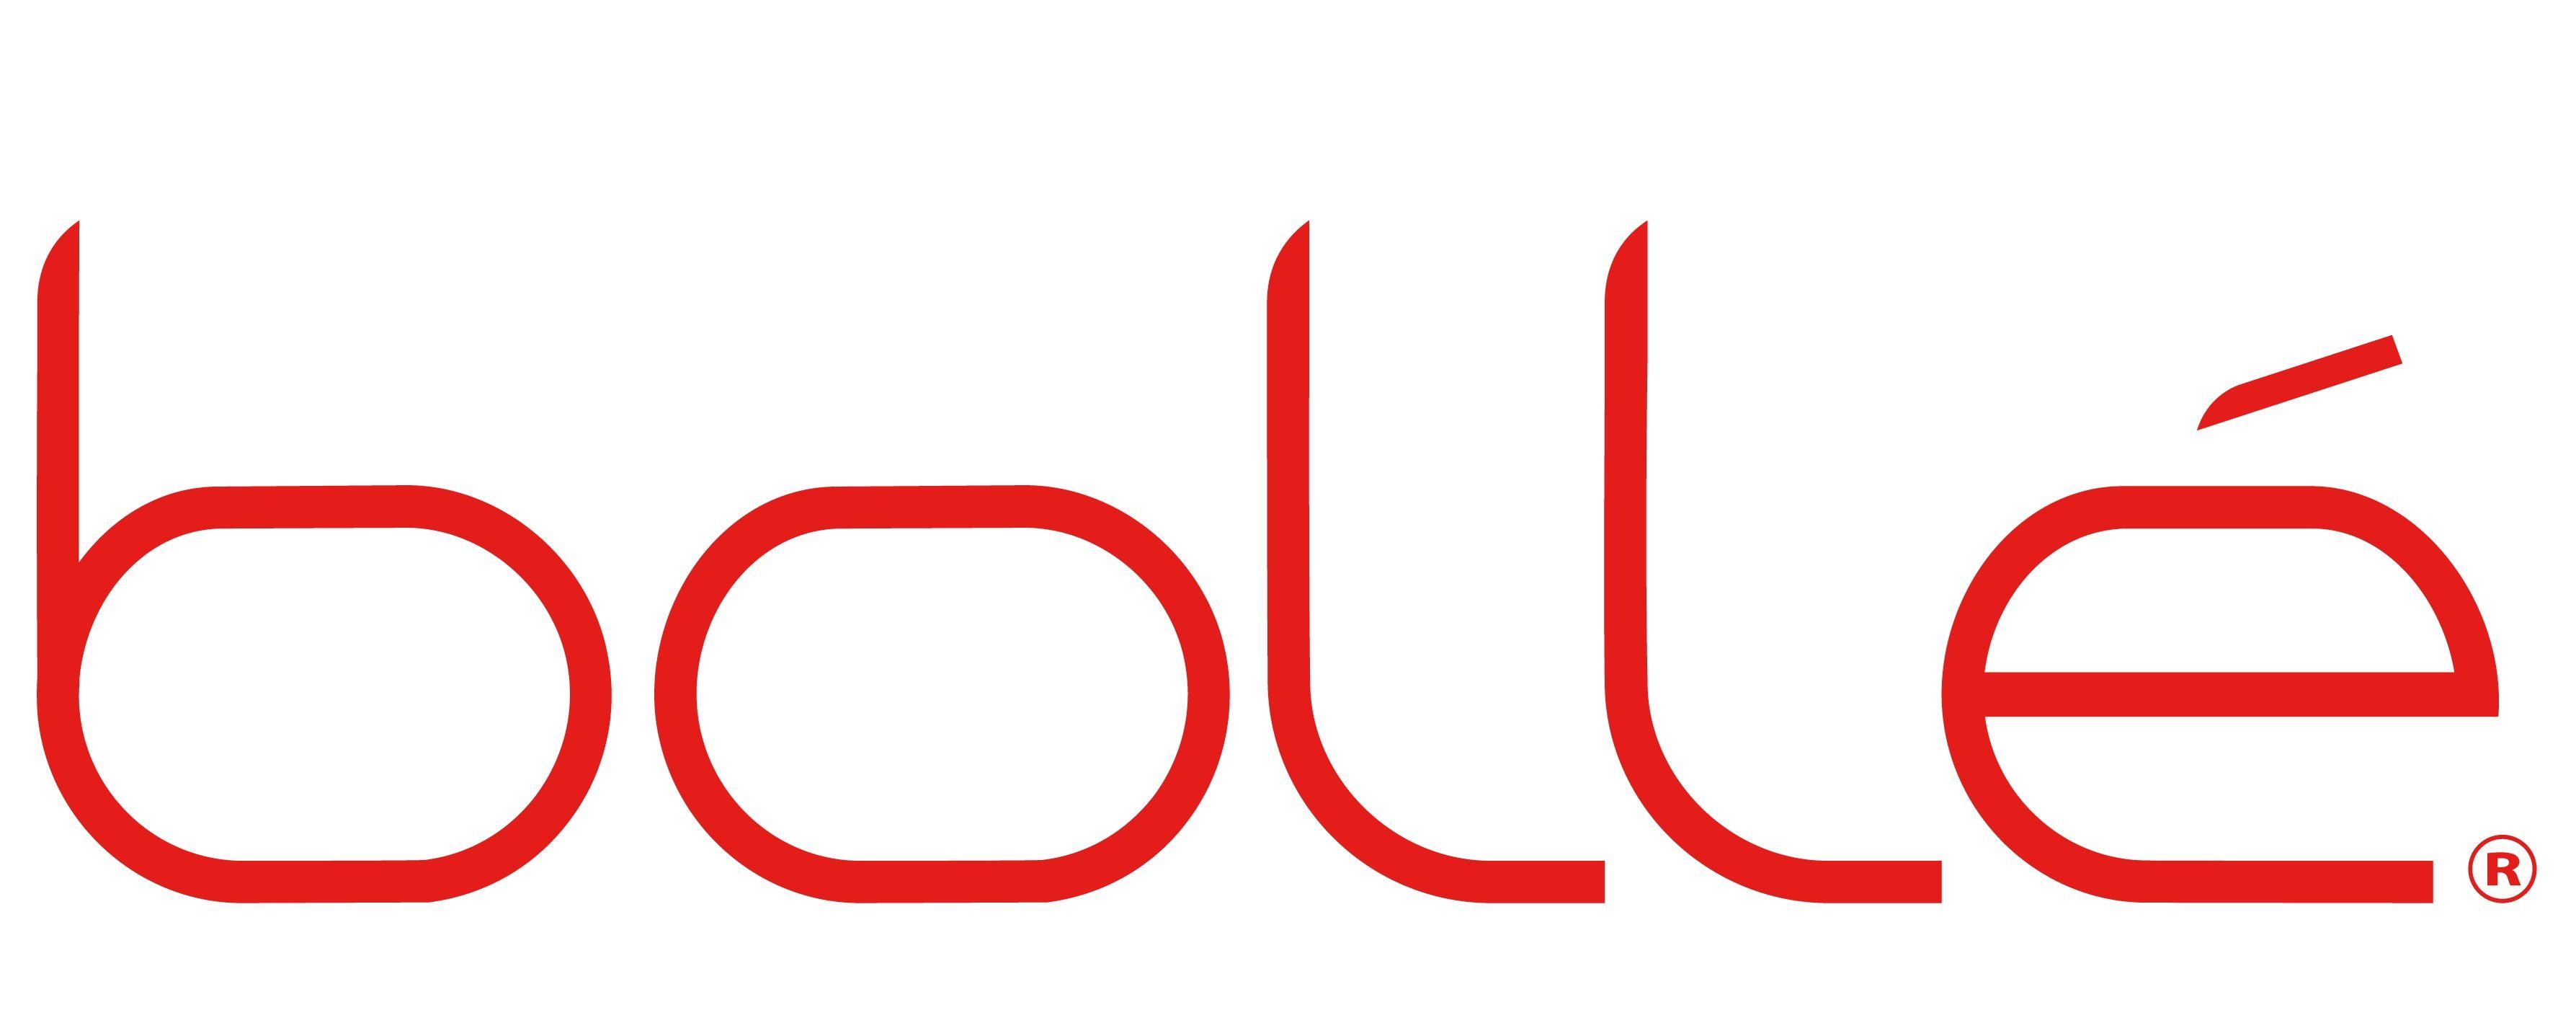 Bolle Logo - Our Brands